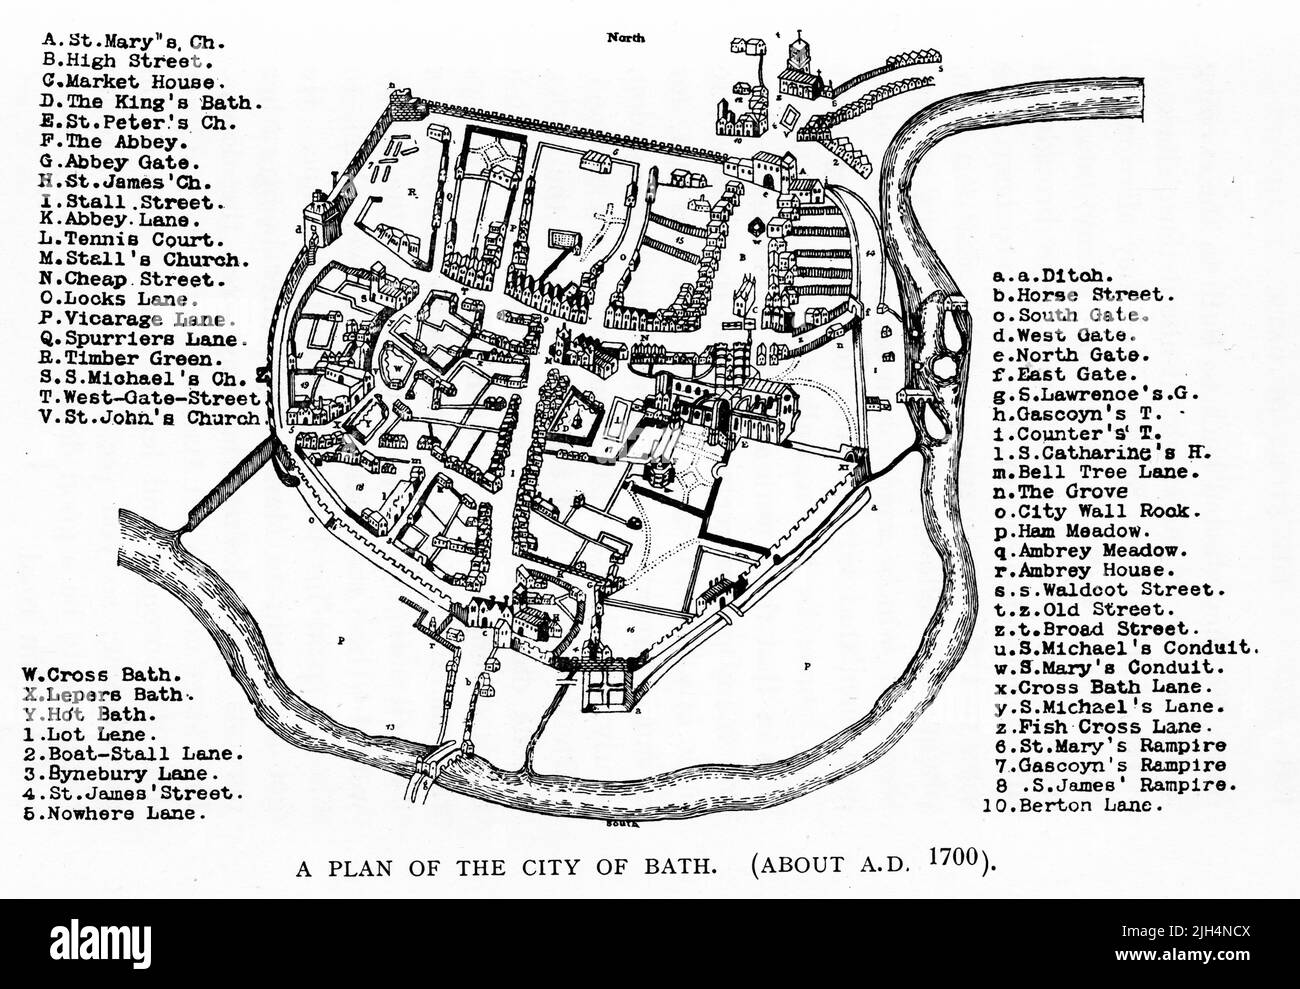 Engraving of plan of the city of Bath, England, in about 1700 AD. Stock Photo